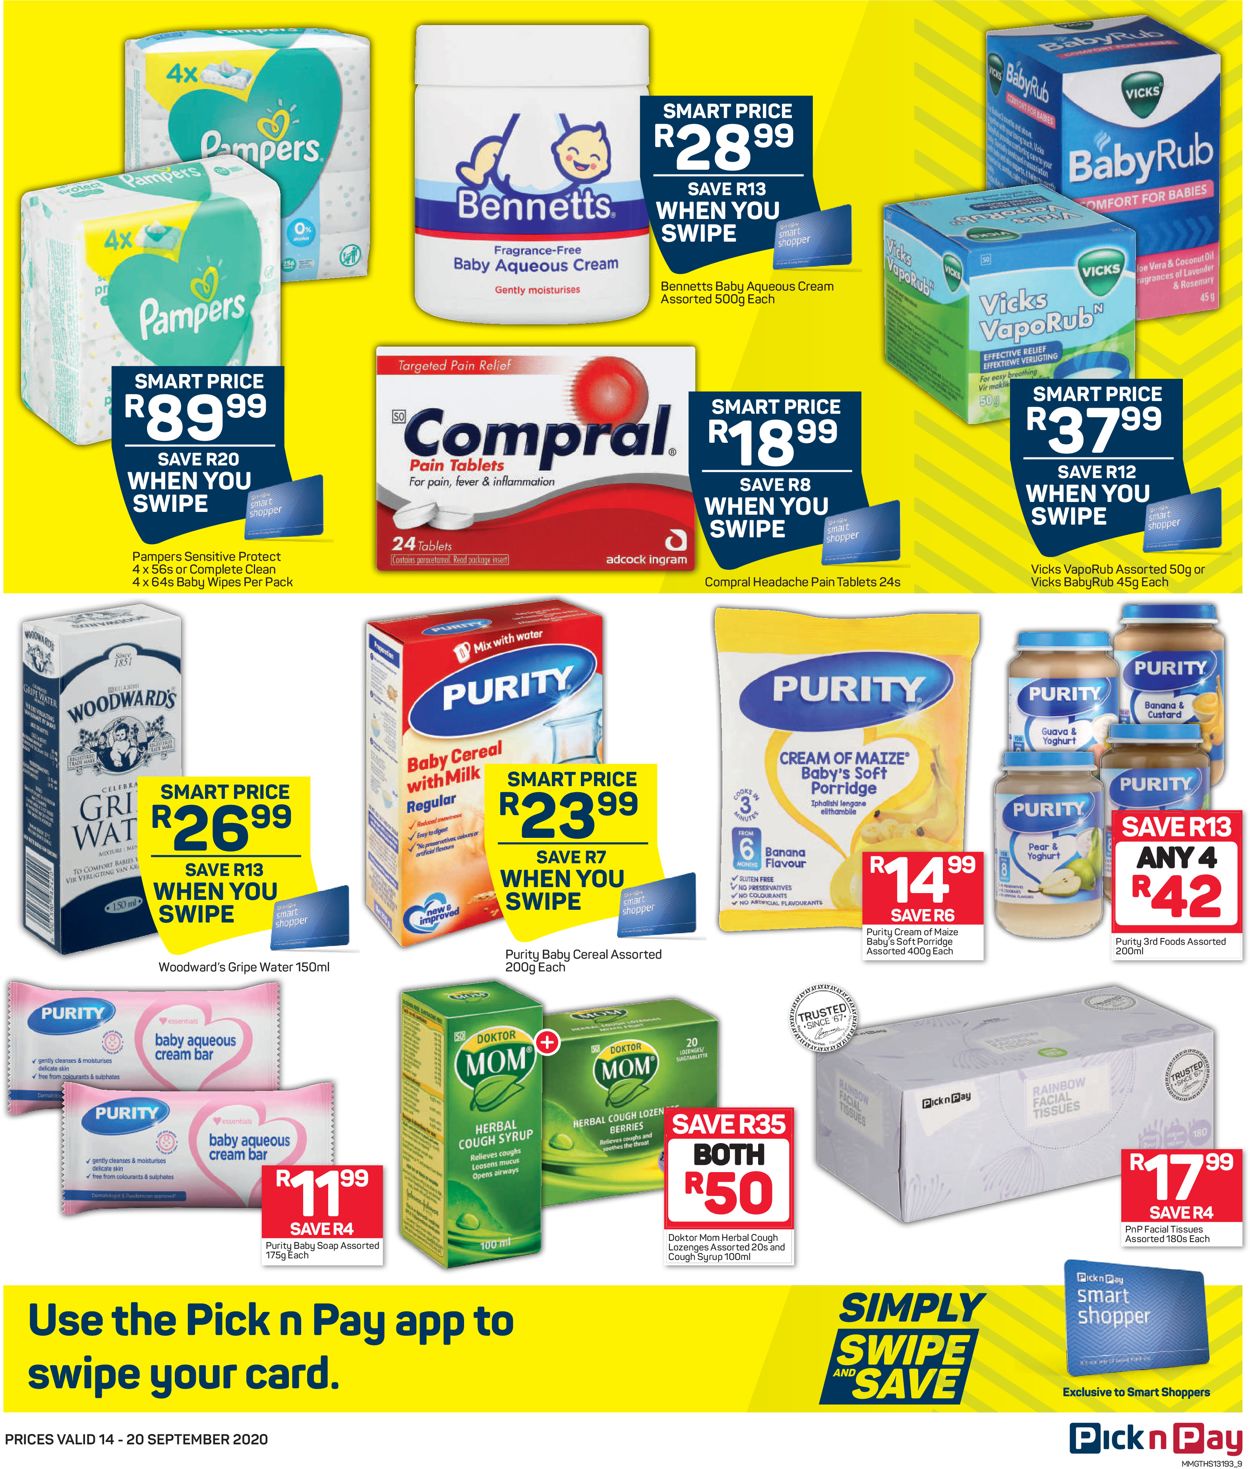 Pick n Pay Catalogue - 2020/09/14-2020/09/20 (Page 9)